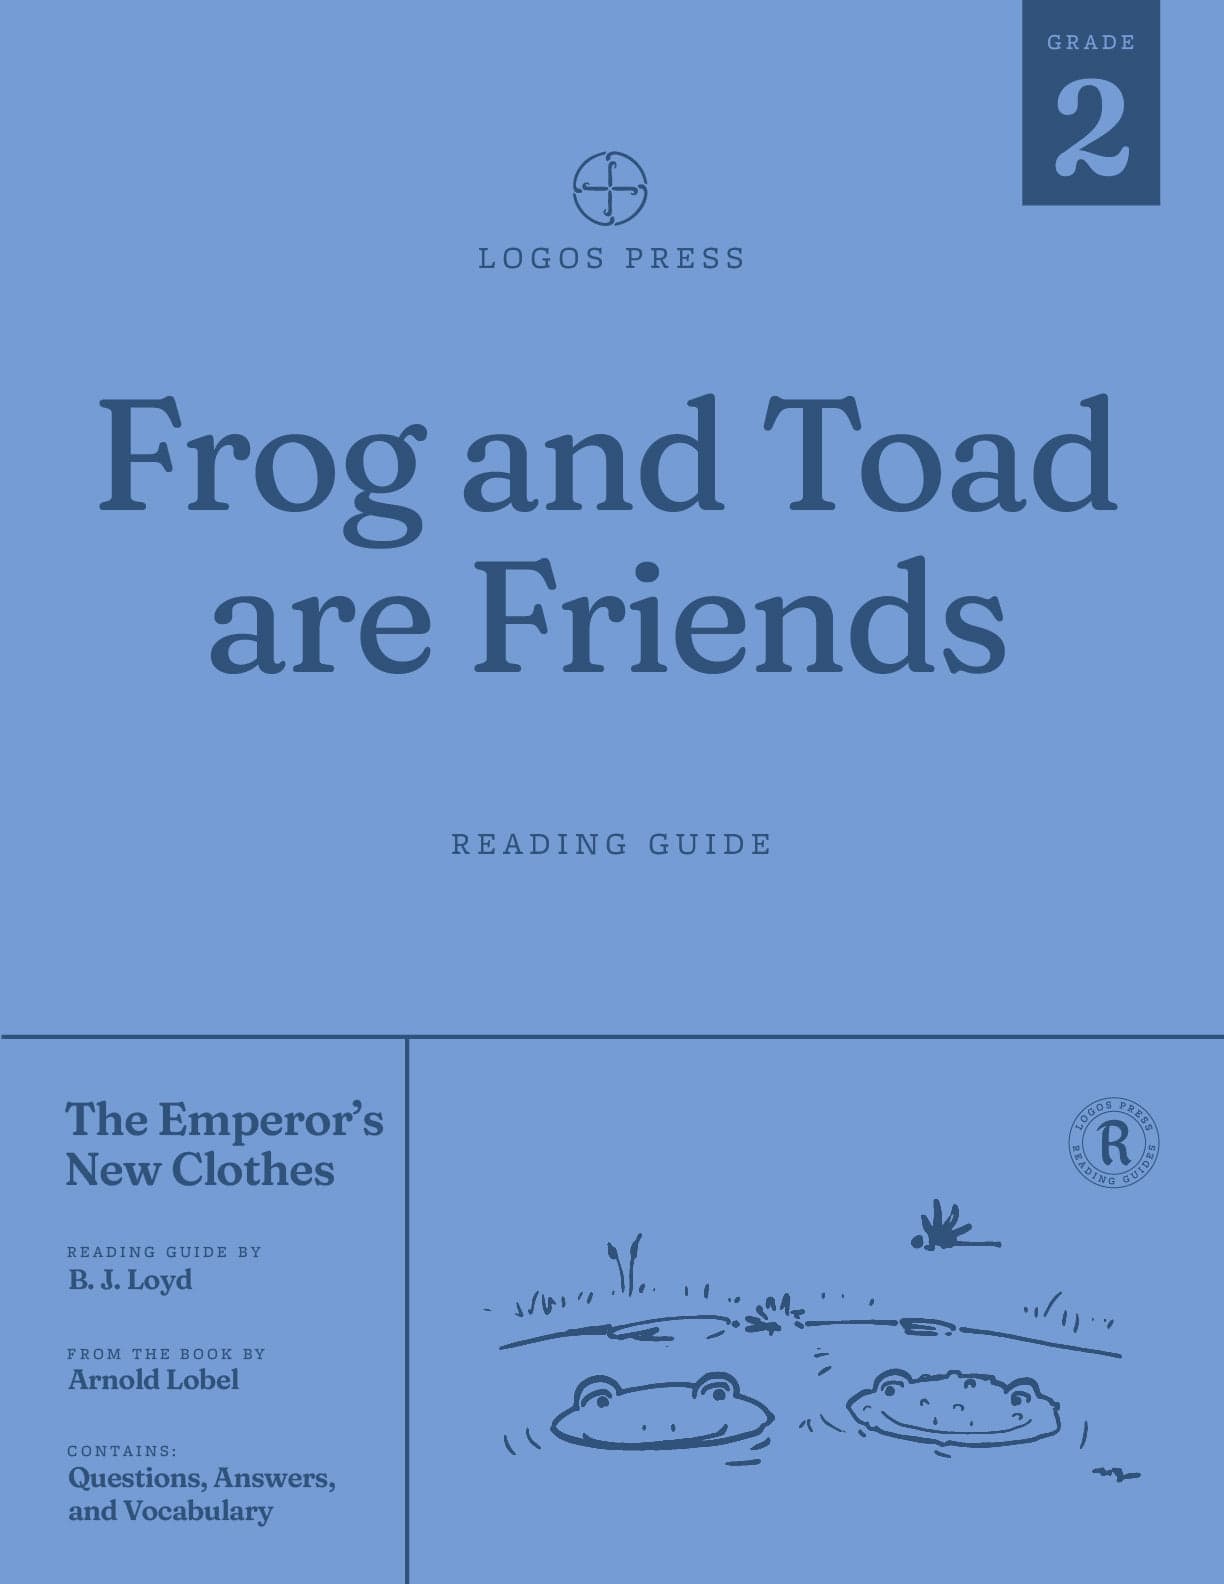 Frog and Toad are Friends - Reading Guide (Download)